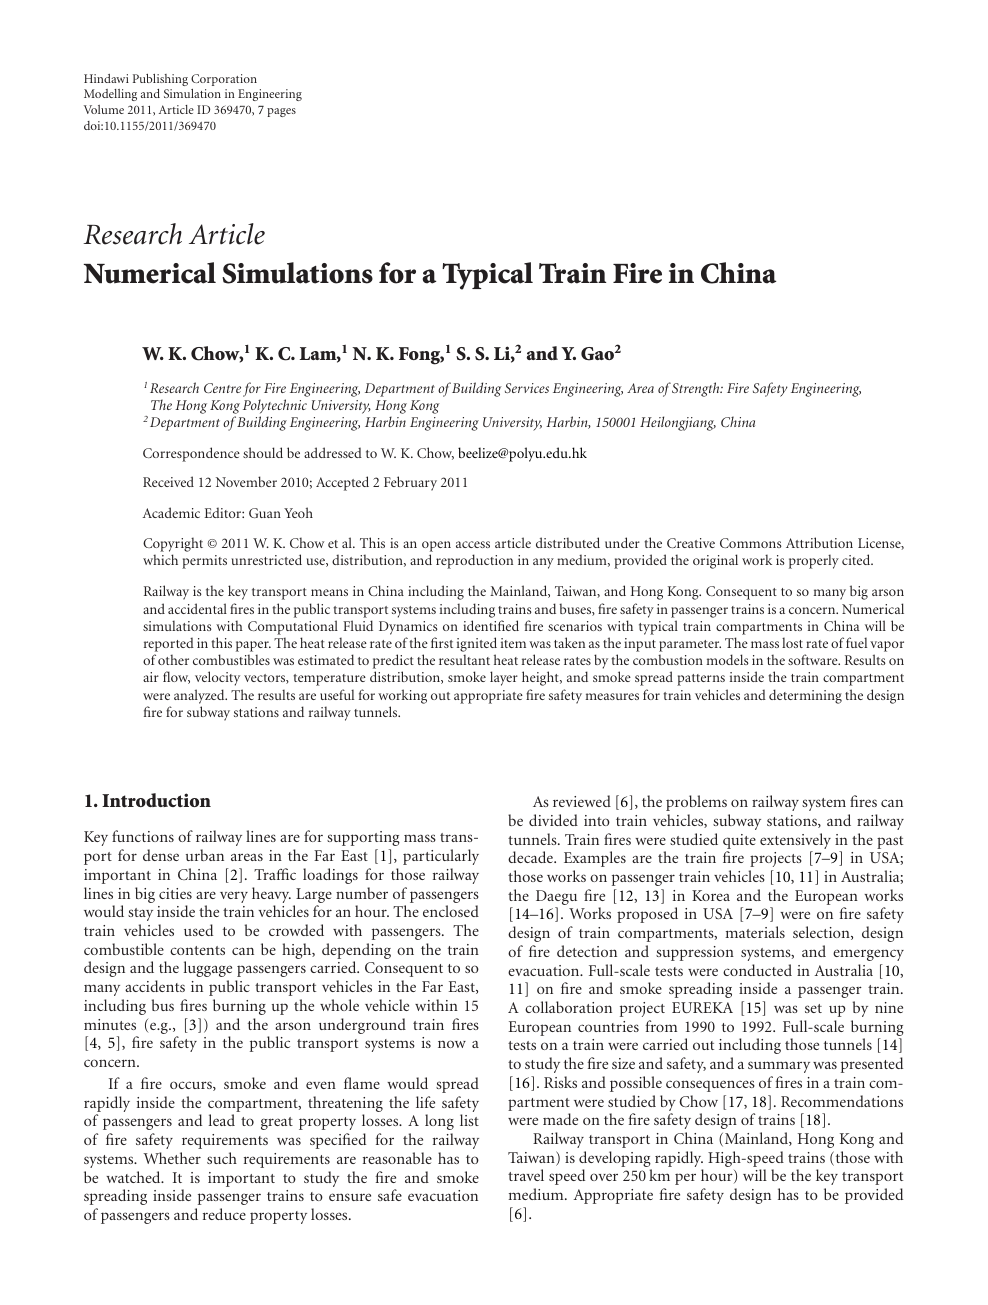 Numerical Simulations For A Typical Train Fire In China Topic Of Research Paper In Chemical Engineering Download Scholarly Article Pdf And Read For Free On Cyberleninka Open Science Hub